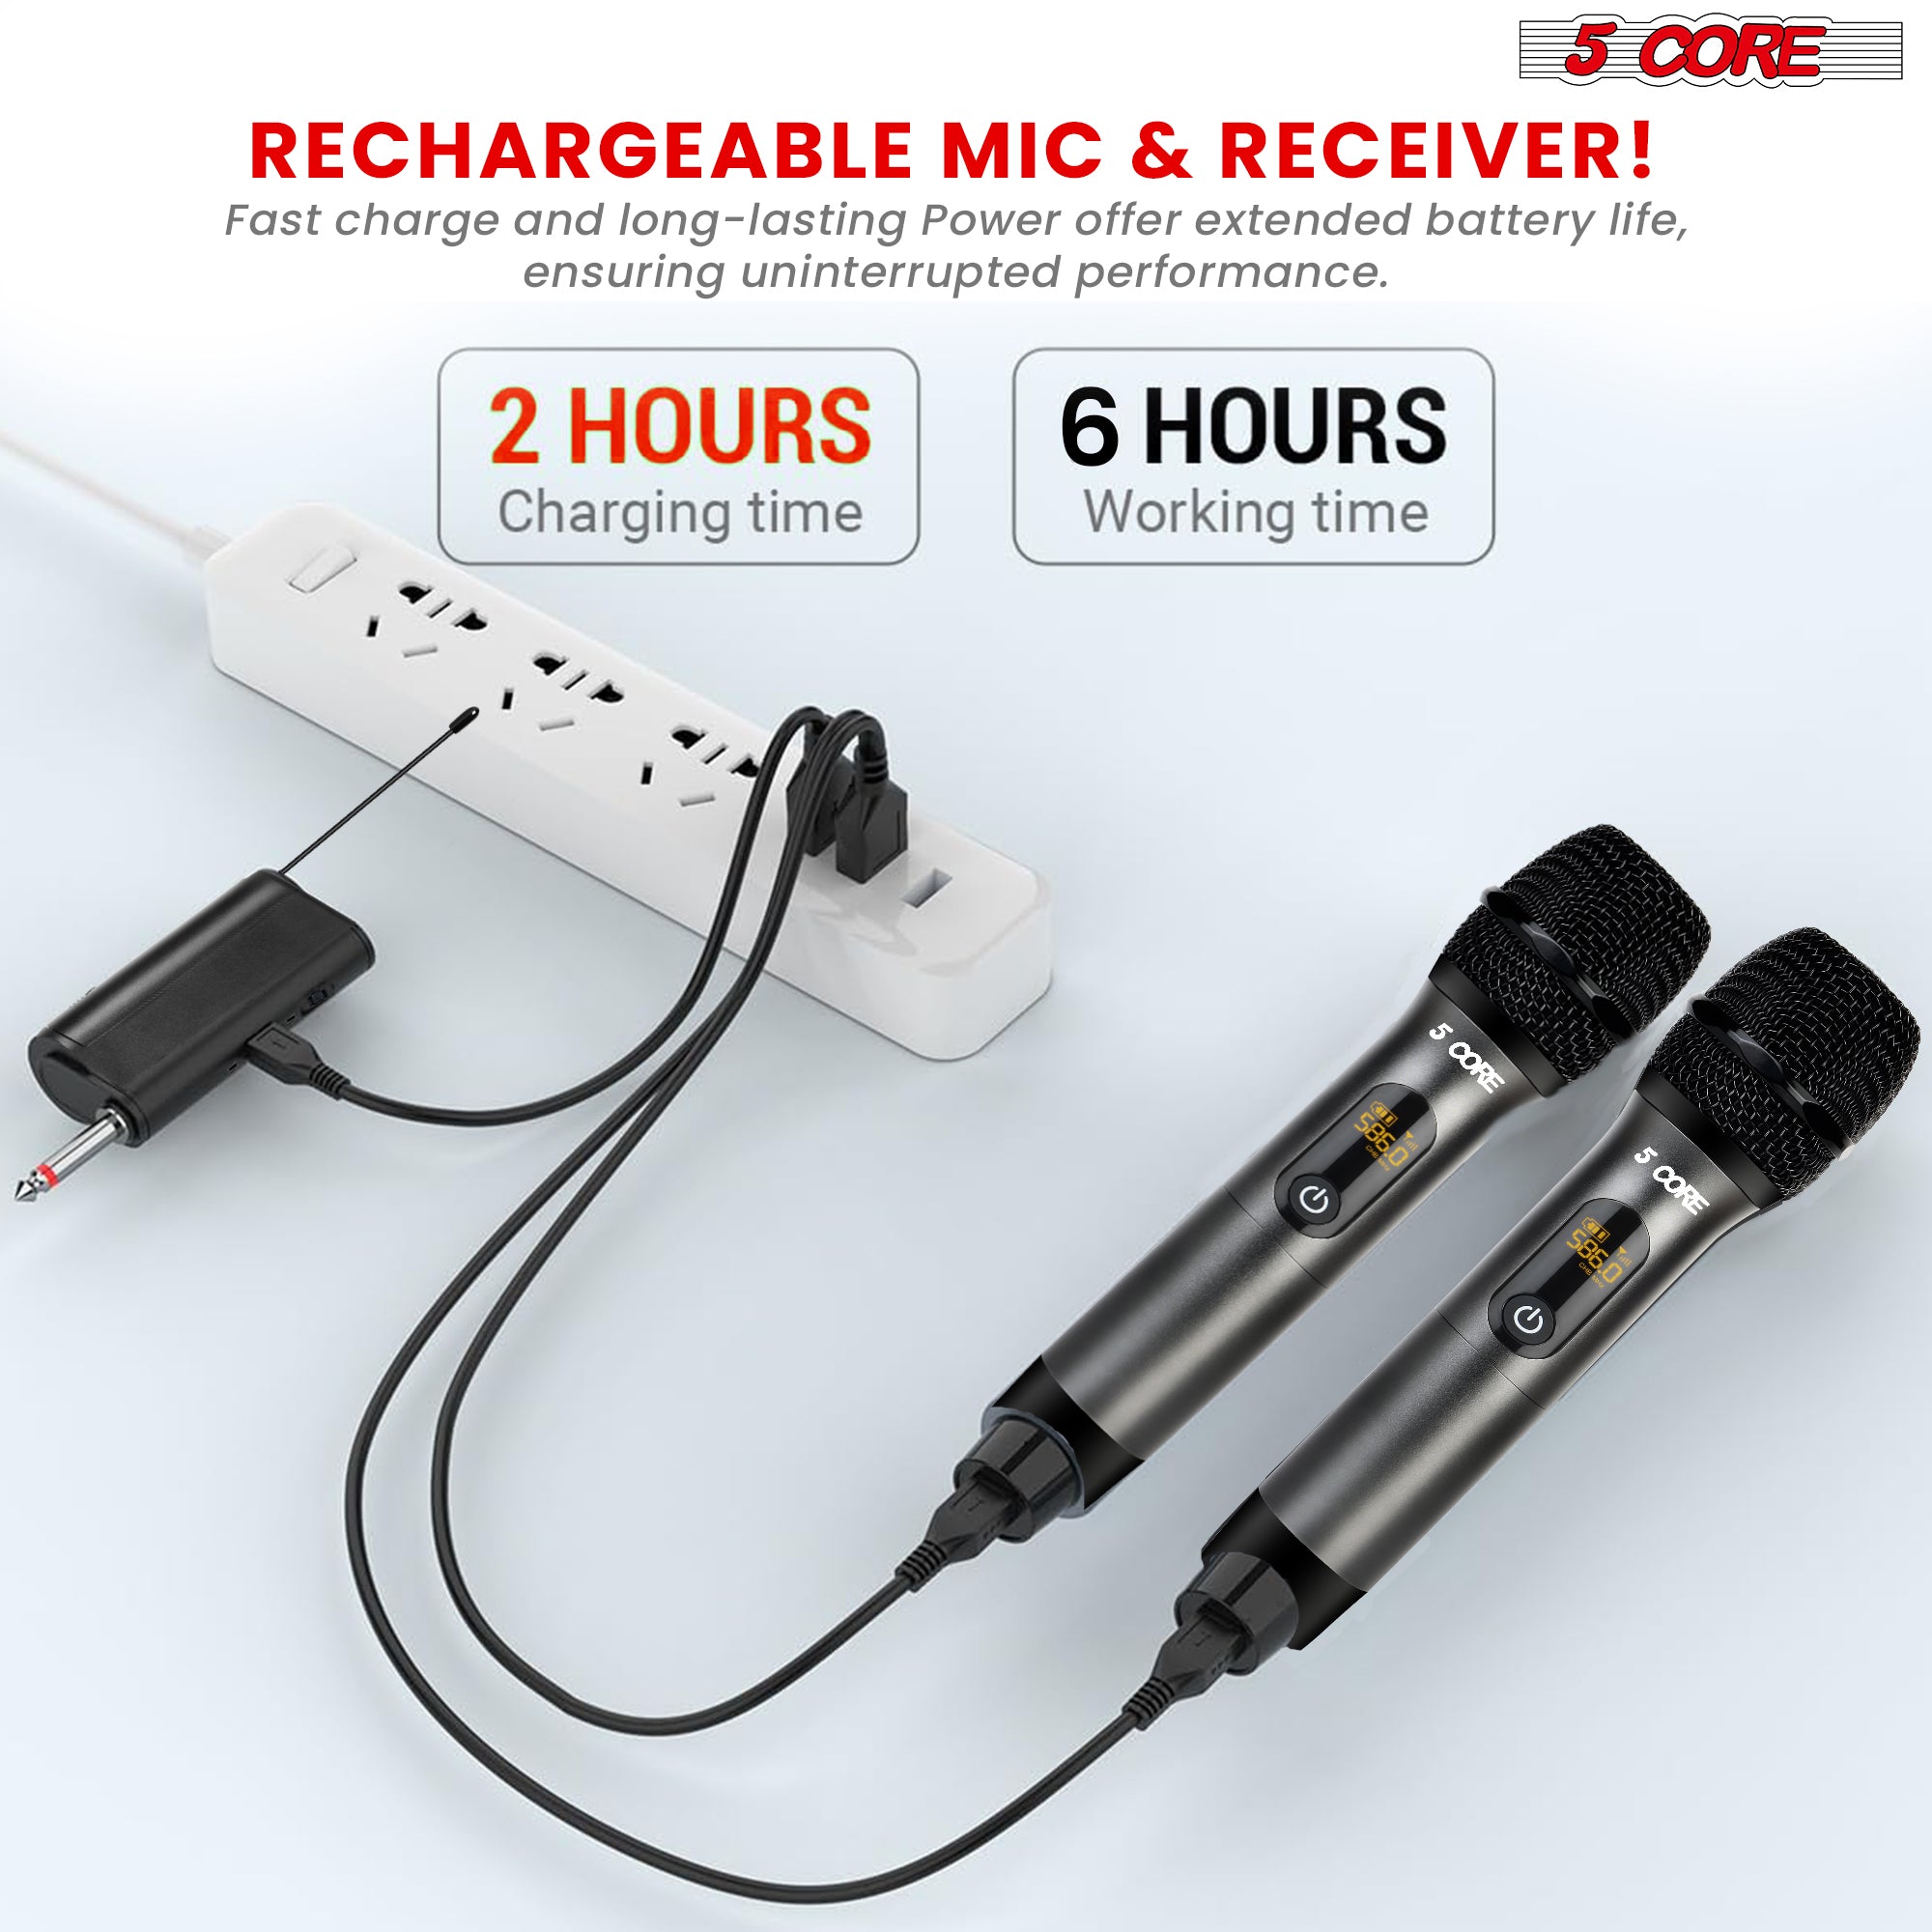 rechargeable mic & reciever